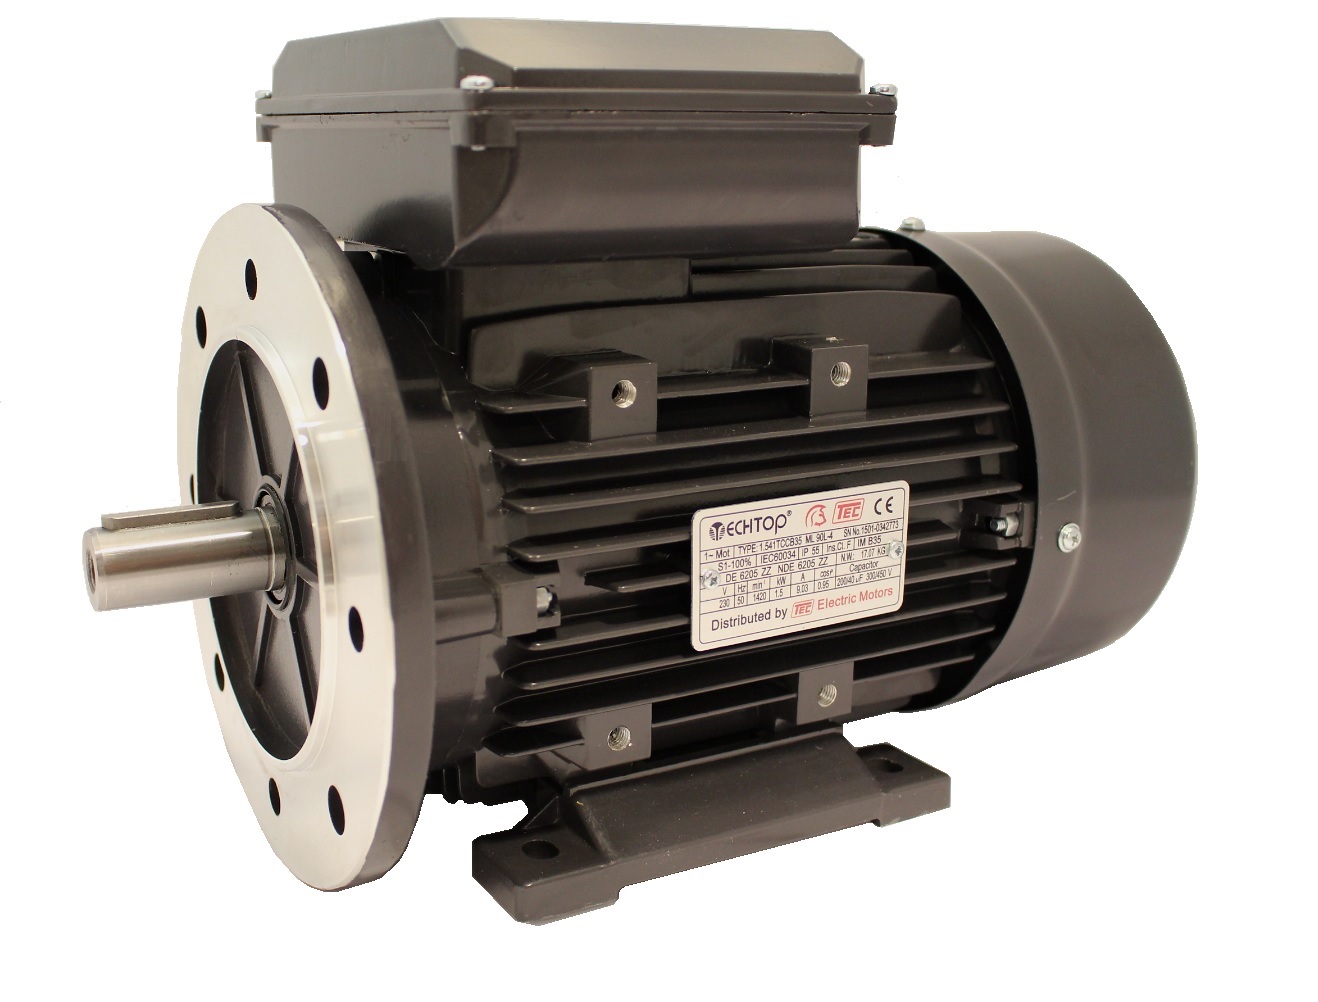 Single Phase 230v Electric Motor, 0.55Kw 4 Pole 1330rpm with Flange & Foot Mount, Perm/Cap